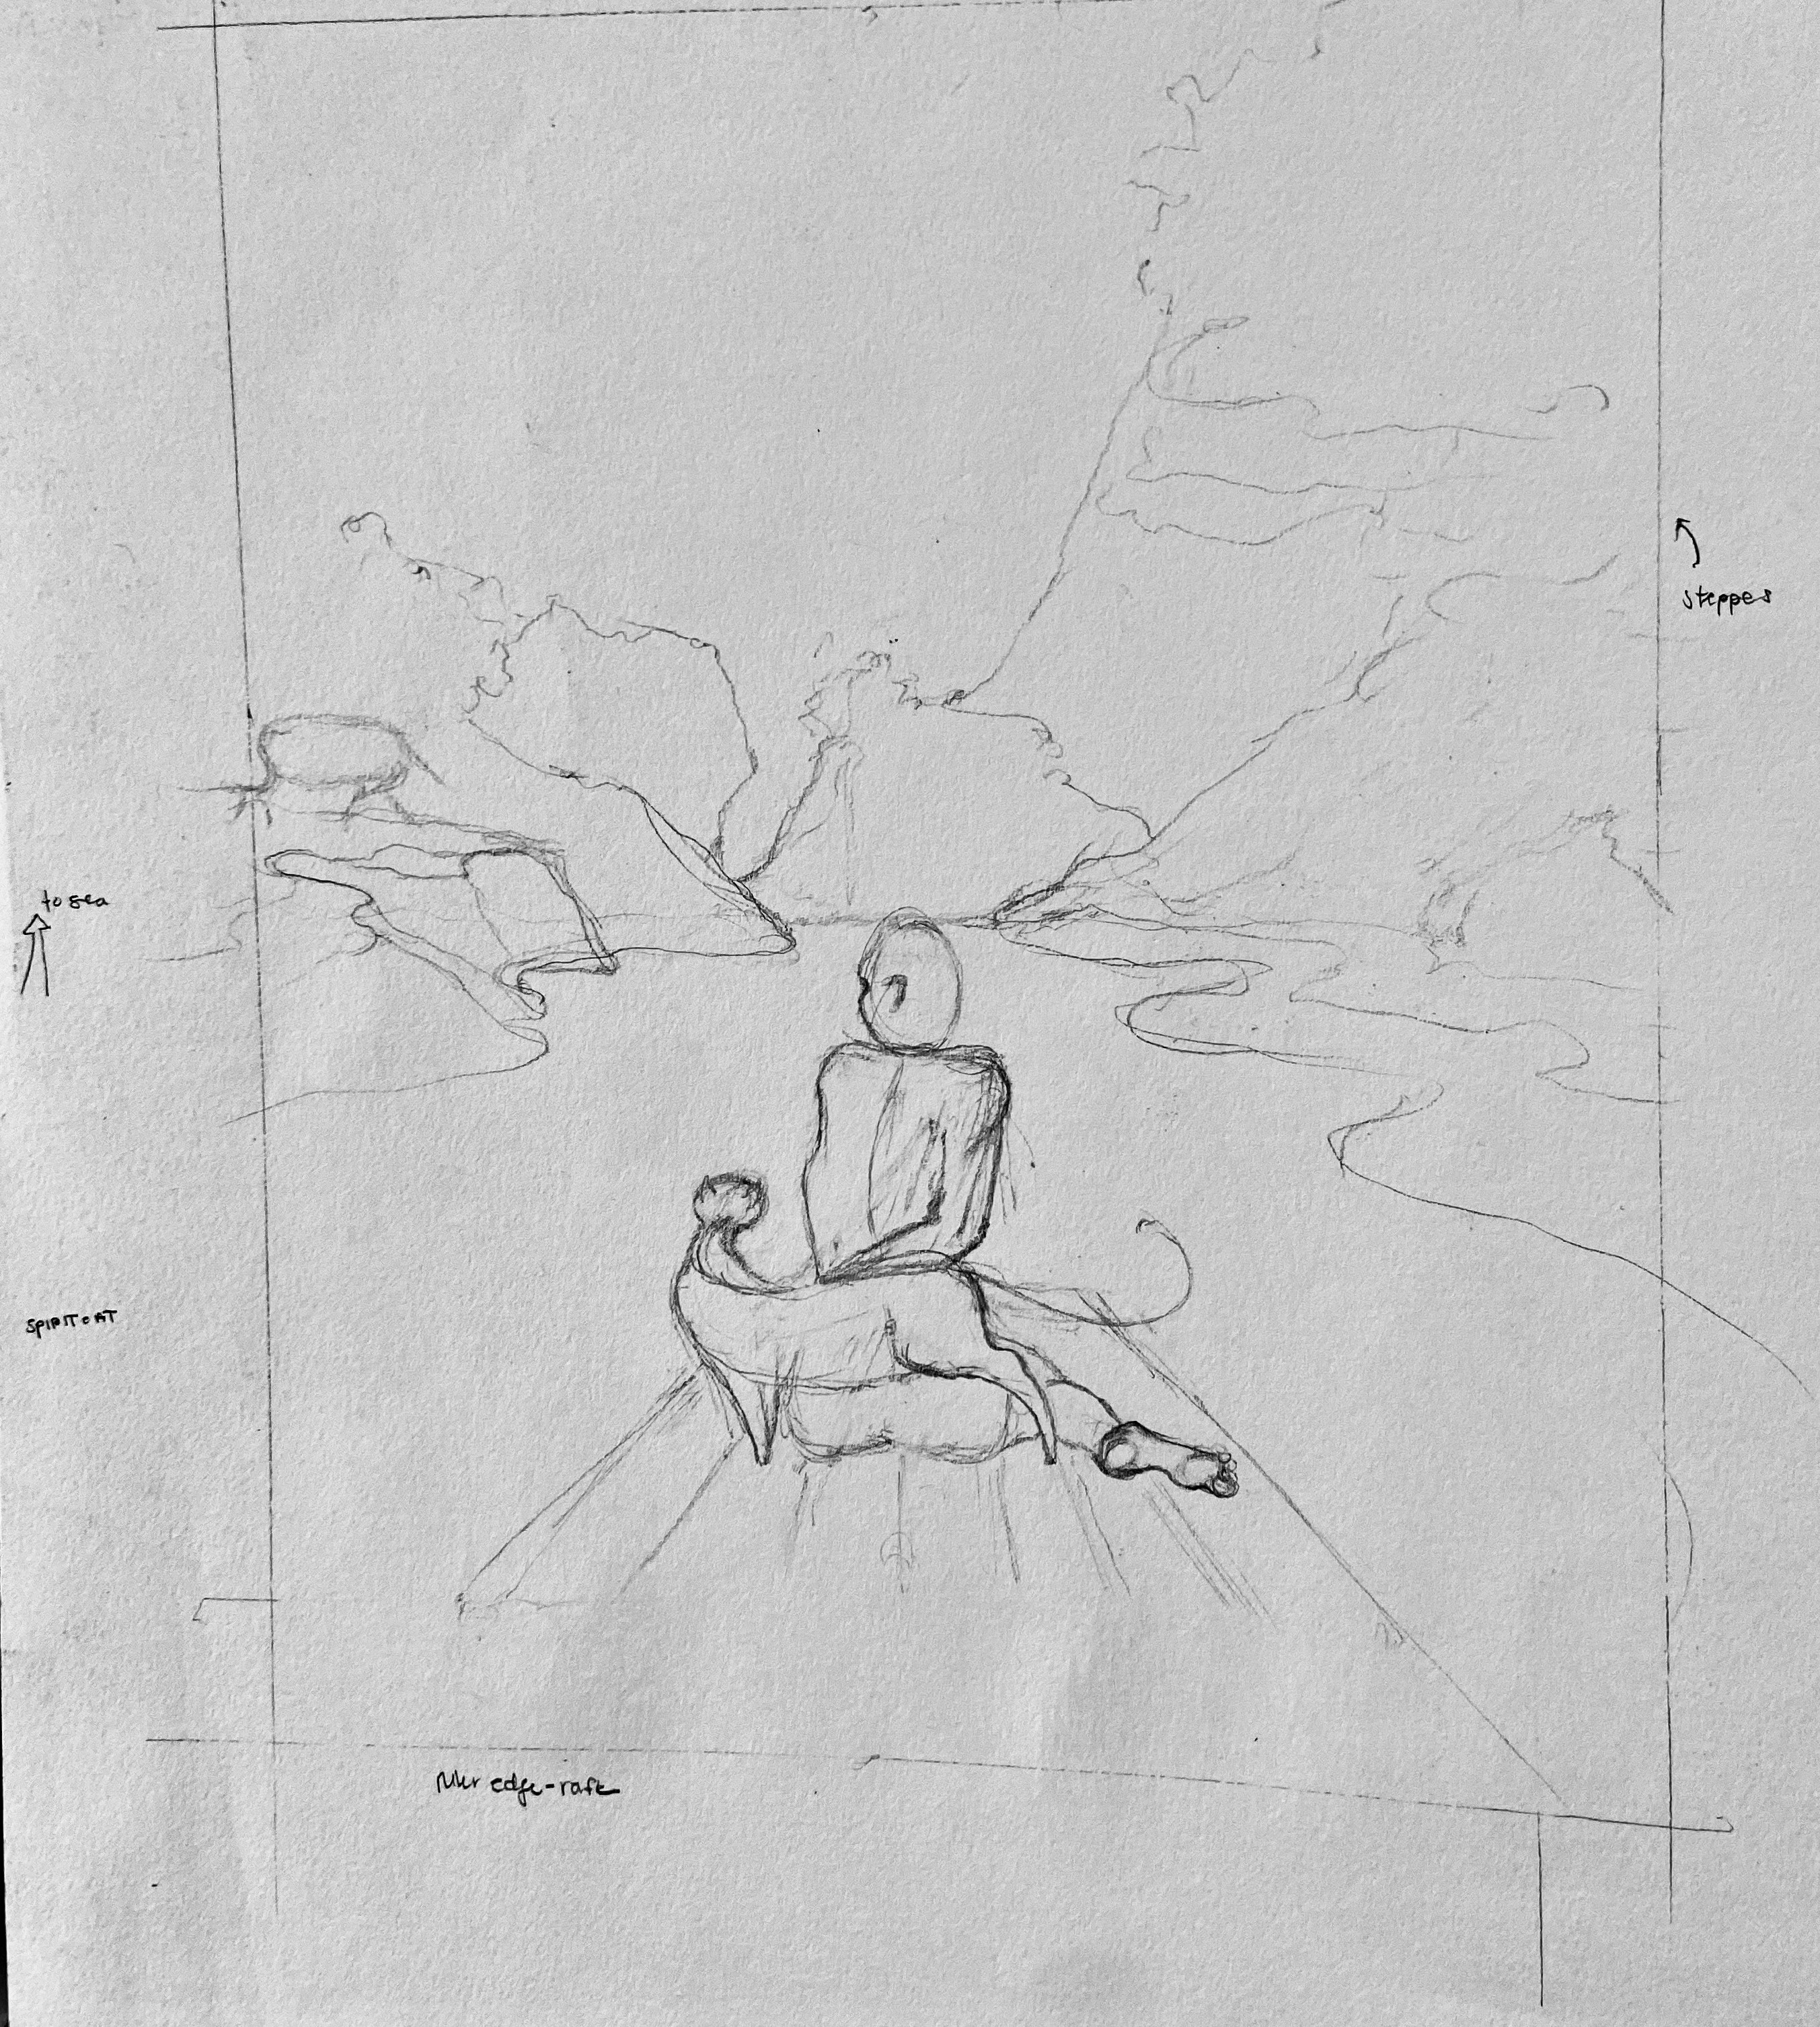 Compositional Sketch (First Draft)